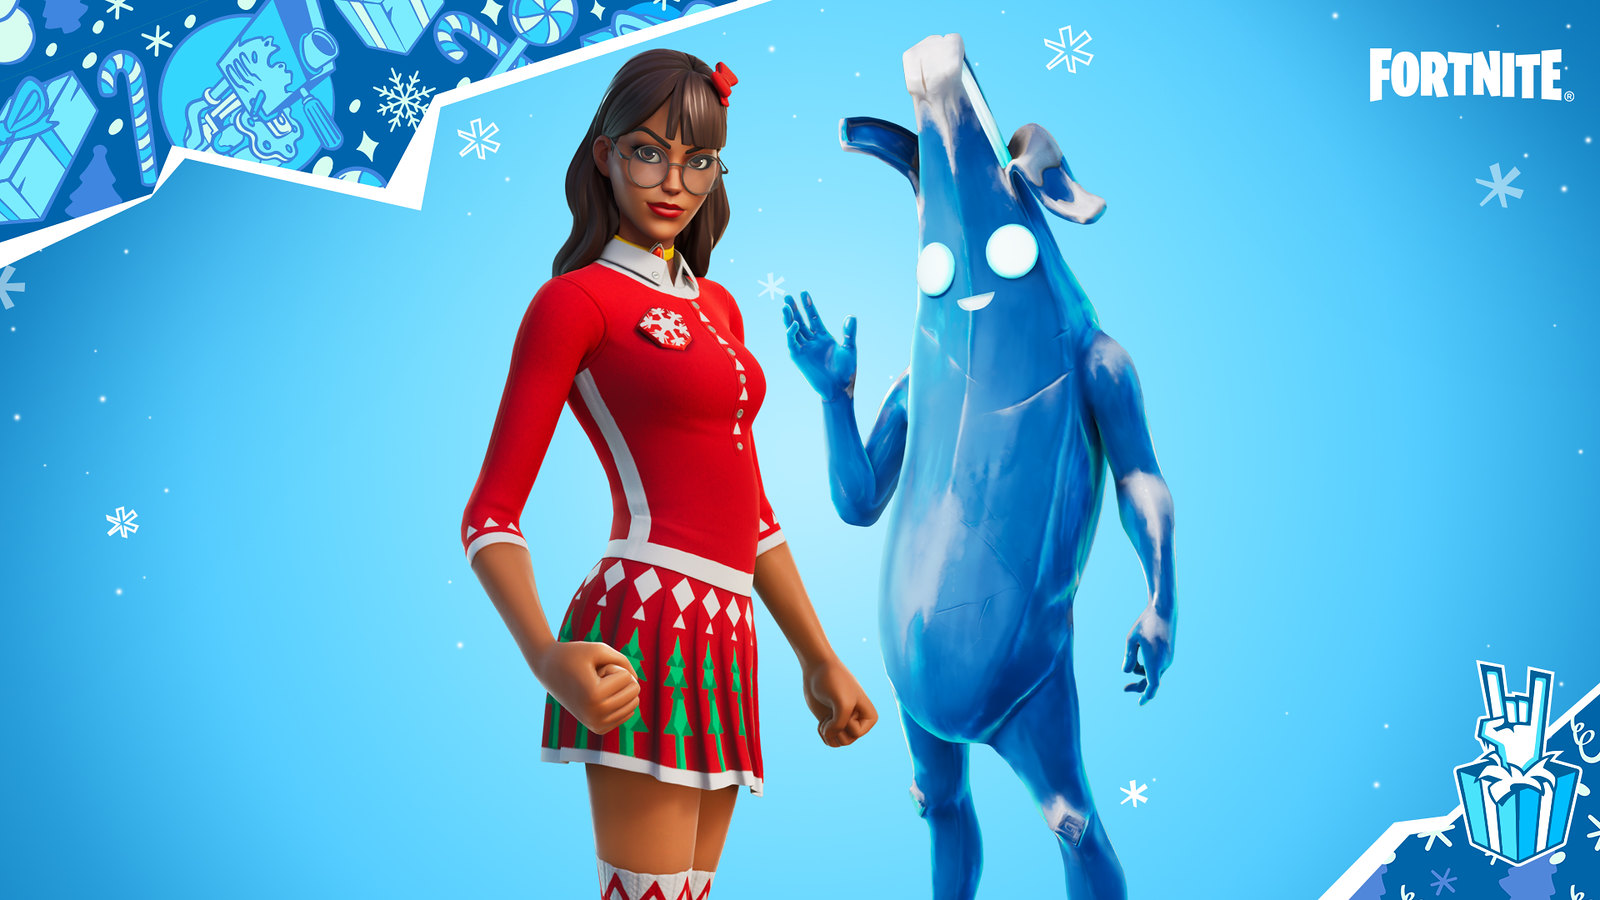 Complete Holiday Quests, Battle With Unvaulted Items, And More In Fortnite’s 2021 Winterfest